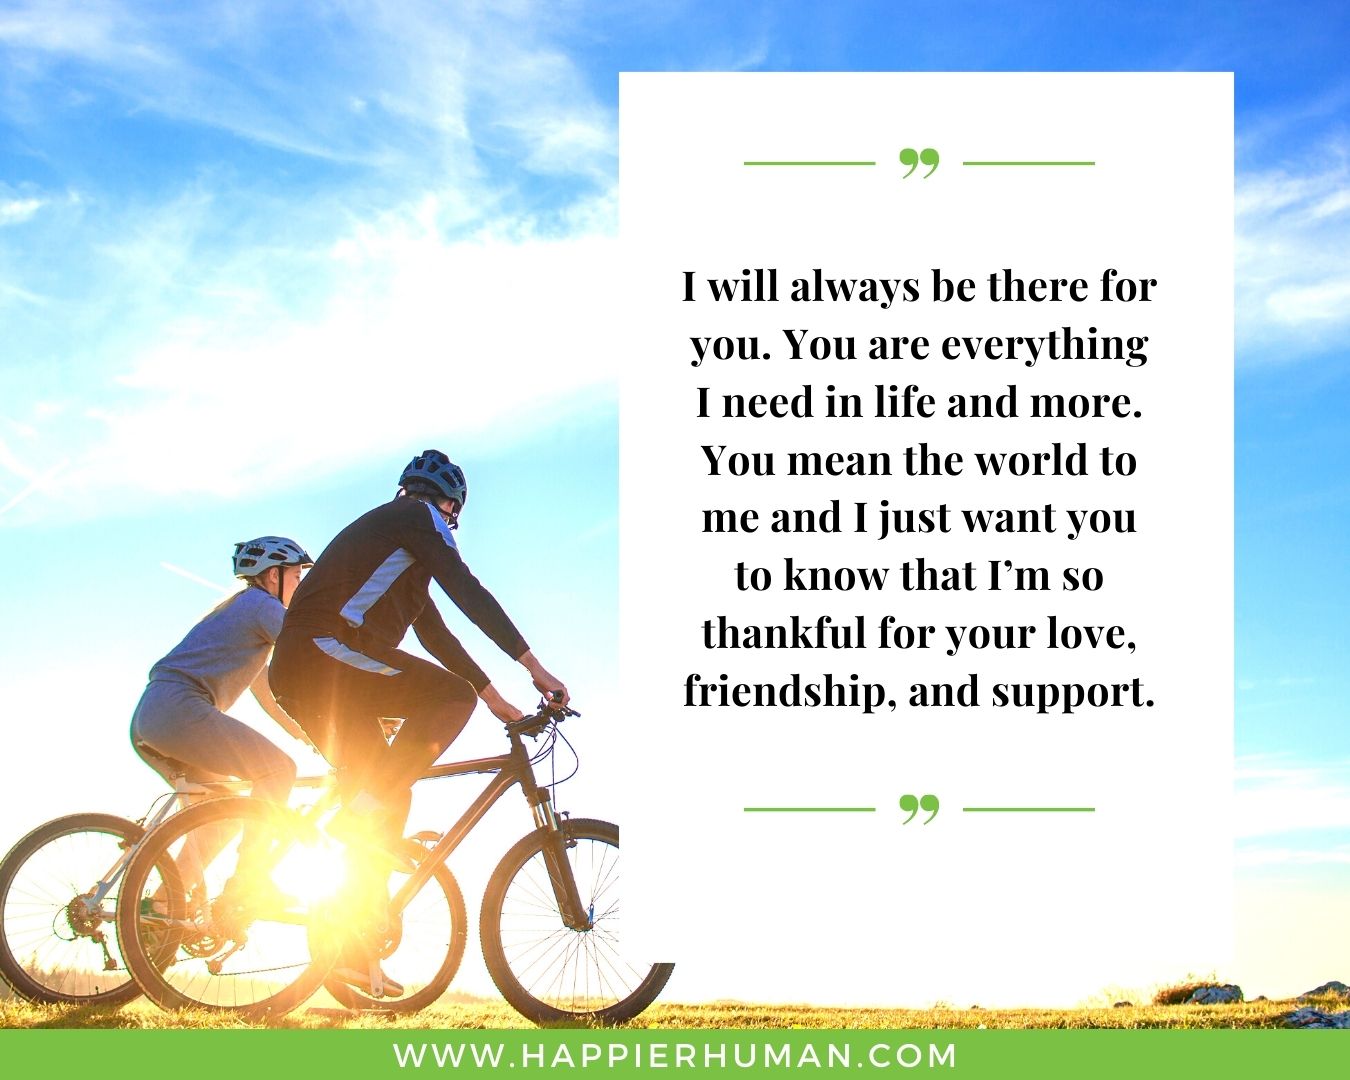 I’m Here for You Quotes - “I will always be there for you. You are everything I need in life and more. You mean the world to me and I just want you to know that I’m so thankful for your love, friendship, and support.”